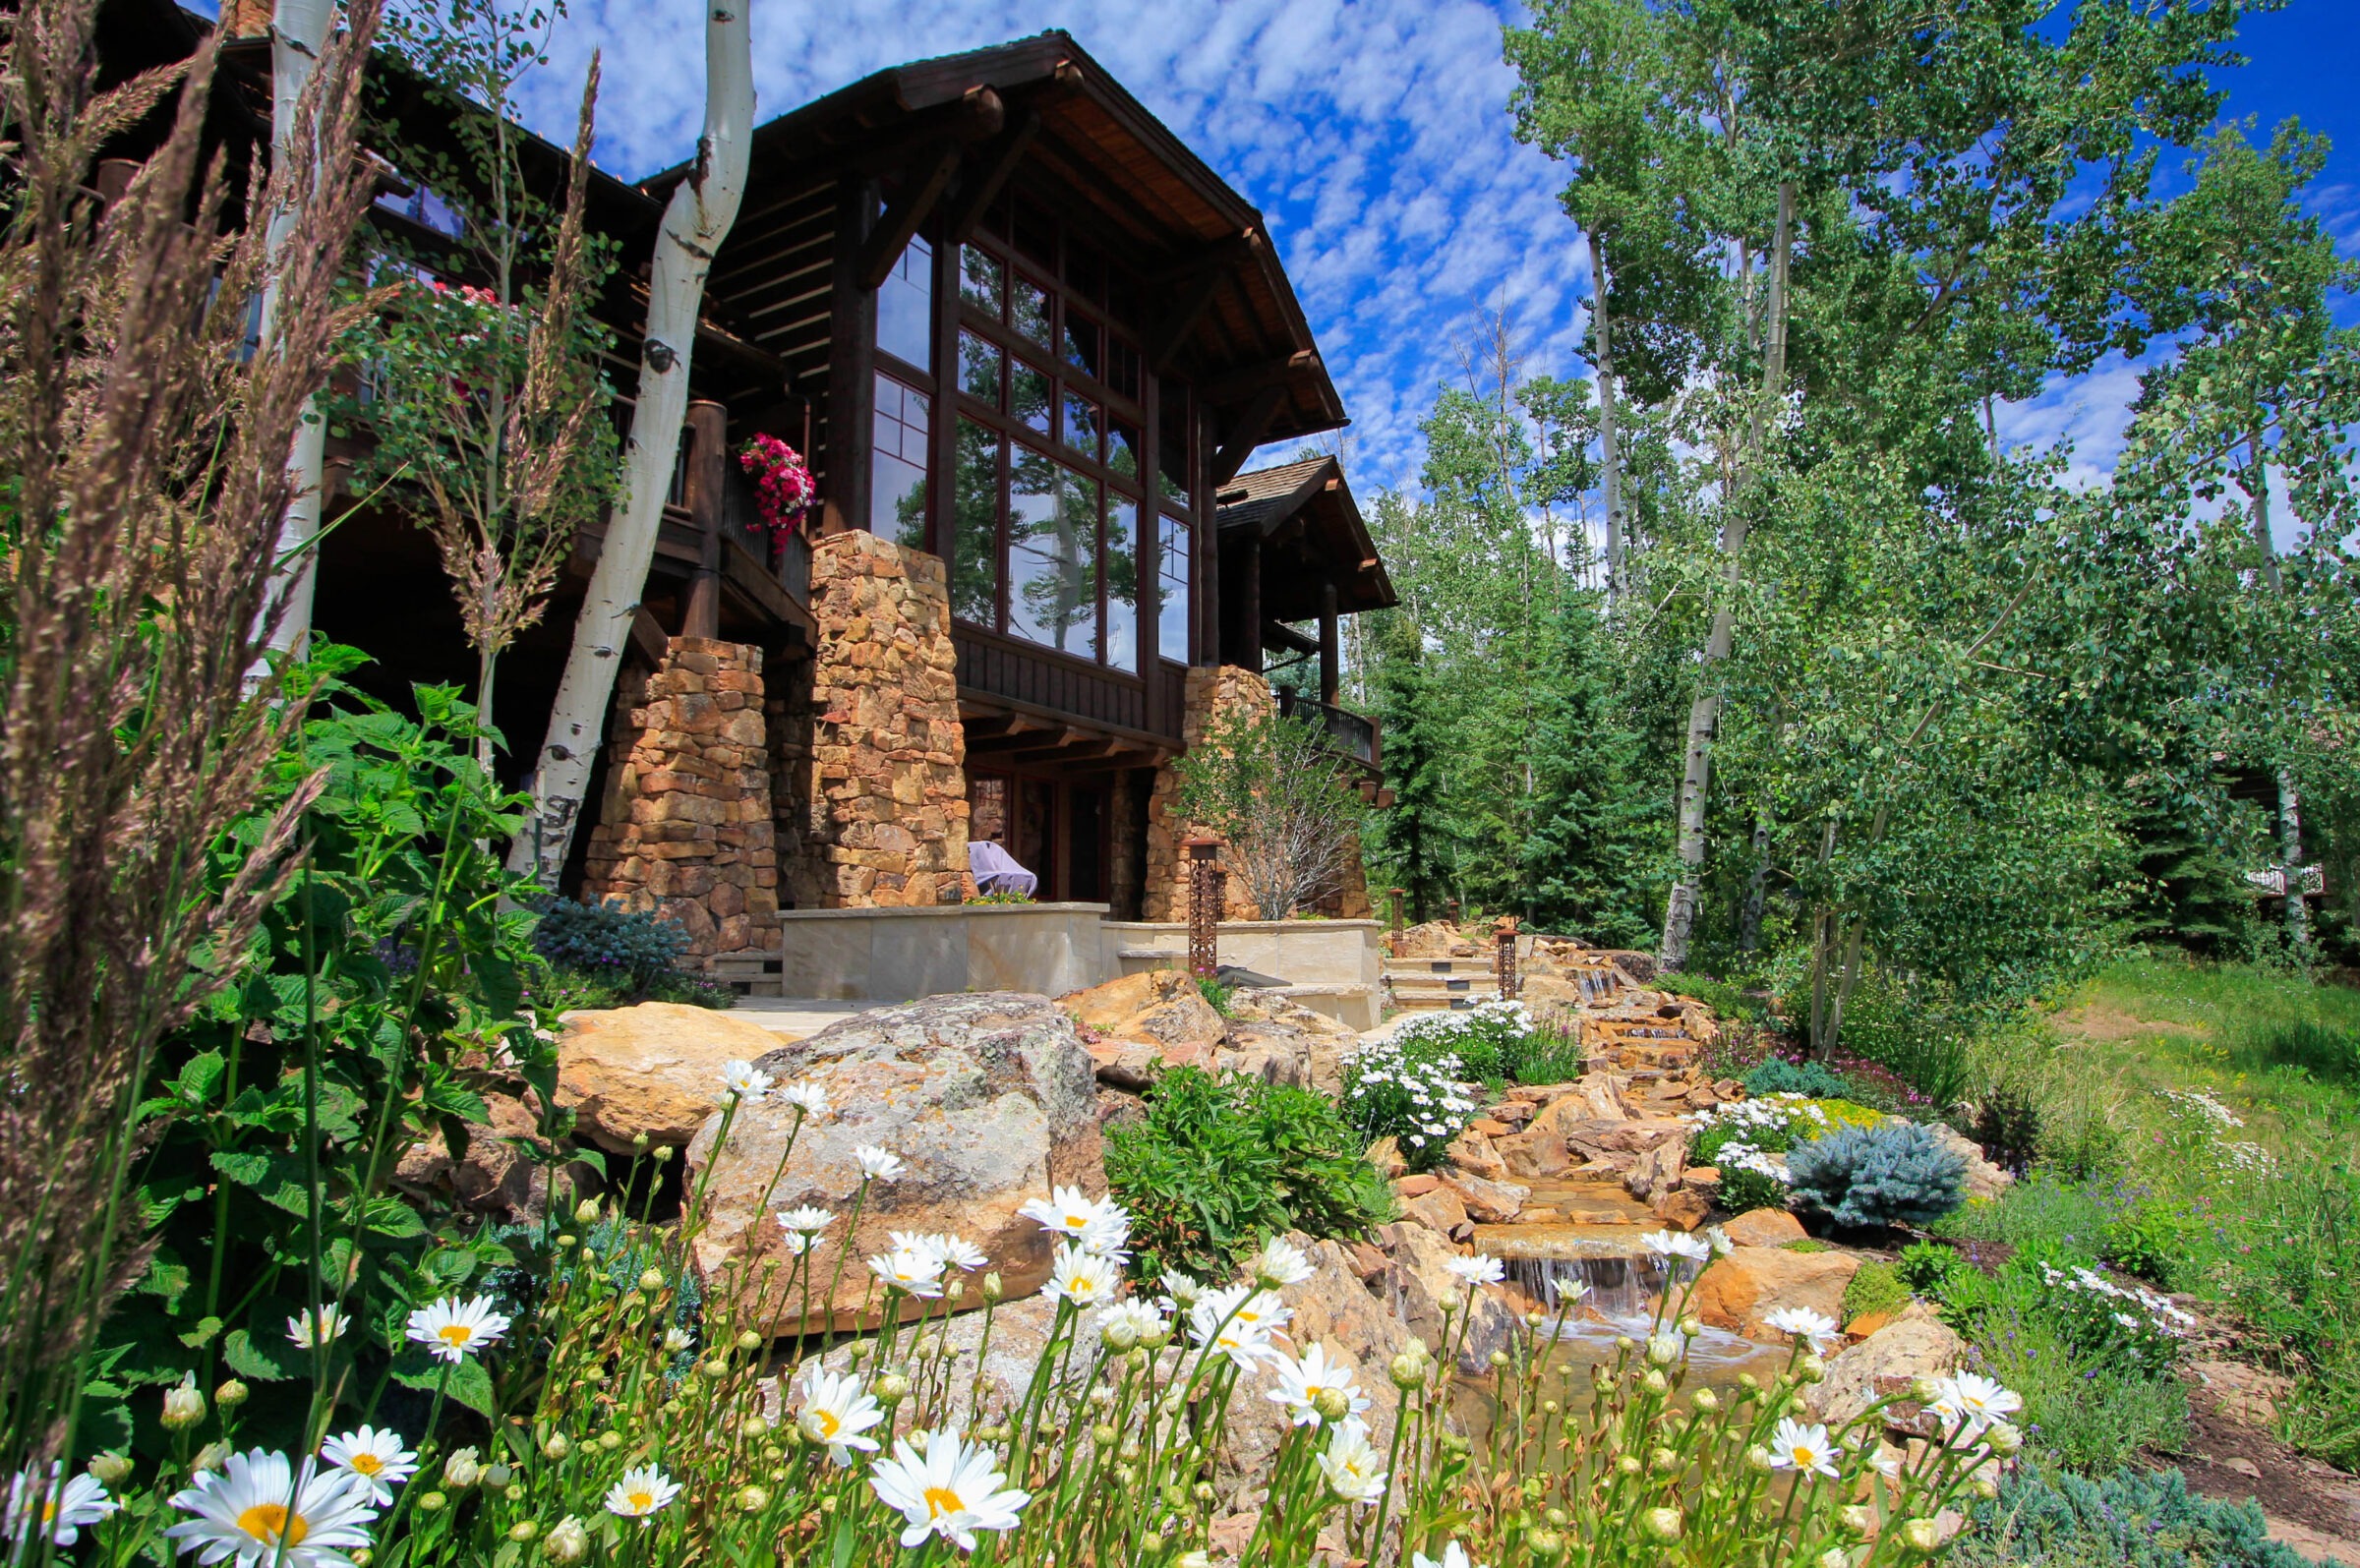 A large cabin with glass windows and stone pillars nestled in a green forest. A landscaped garden with flowers, rocks, and a small waterfall in the foreground.